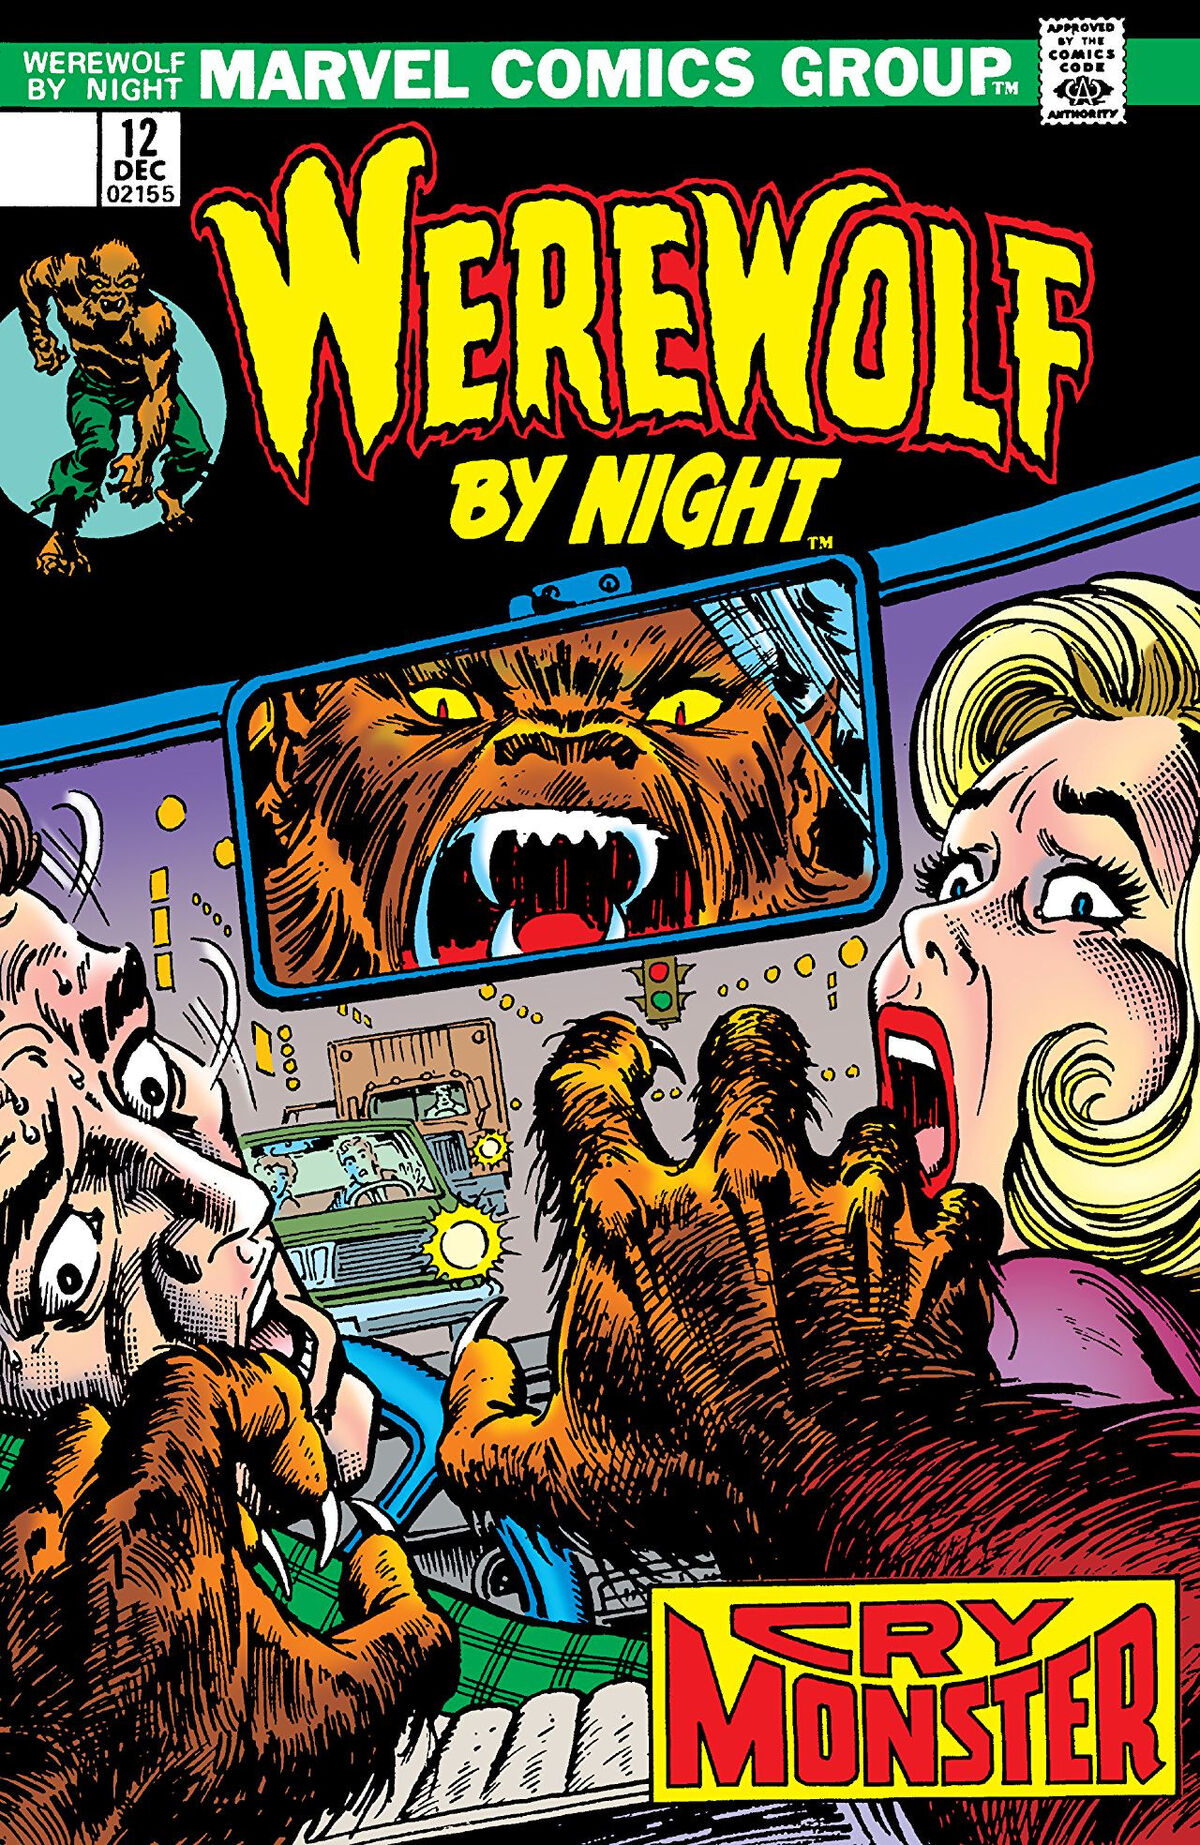 Werewolf by Night Review